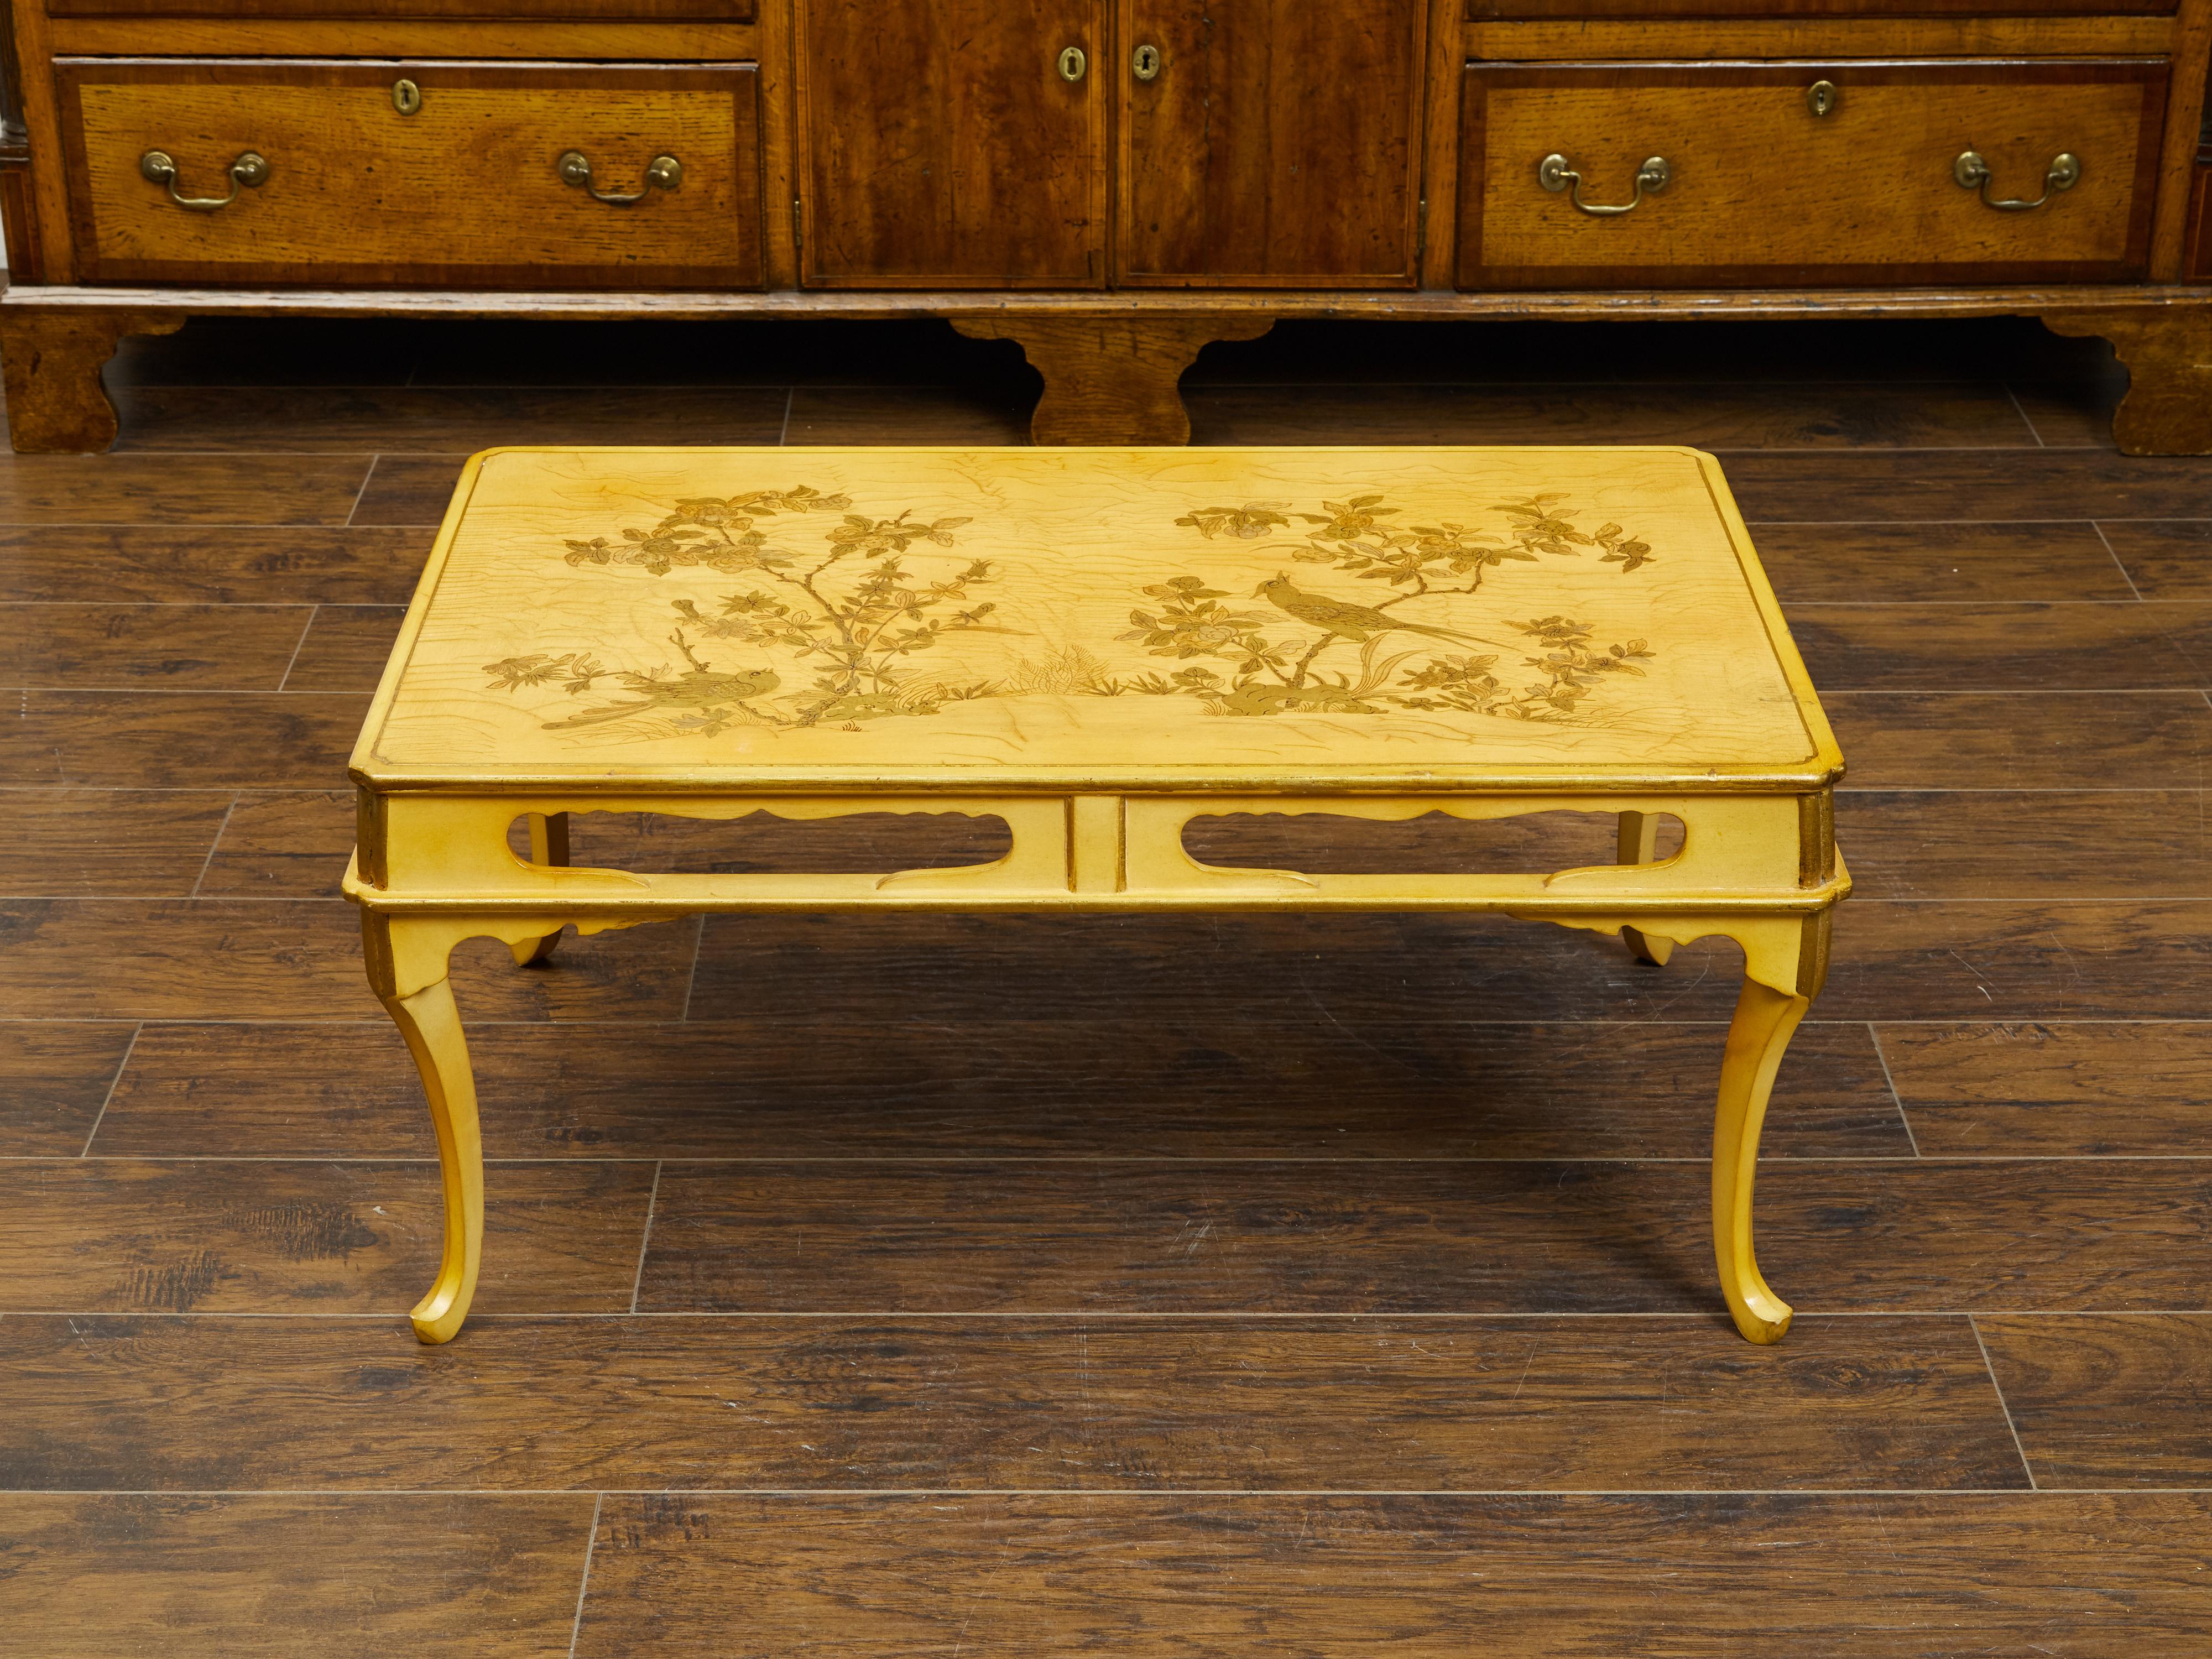 French Midcentury Chinoiserie Style Coffee Table with Décor or Birds in Foliage In Good Condition For Sale In Atlanta, GA